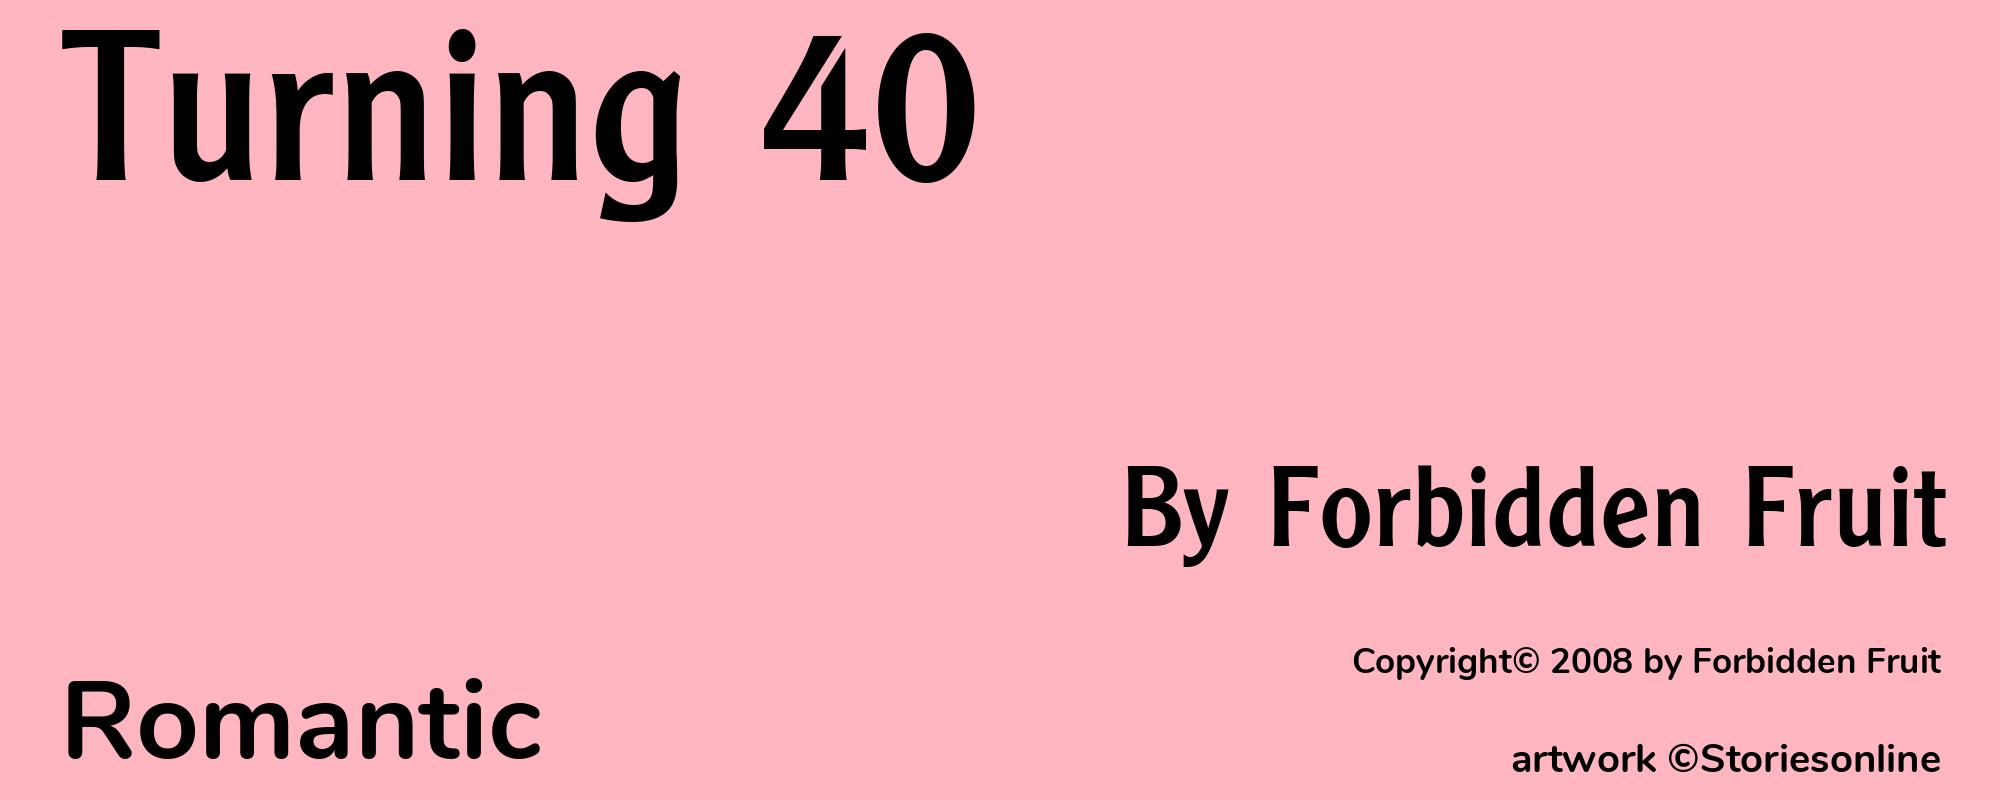 Turning 40 - Cover